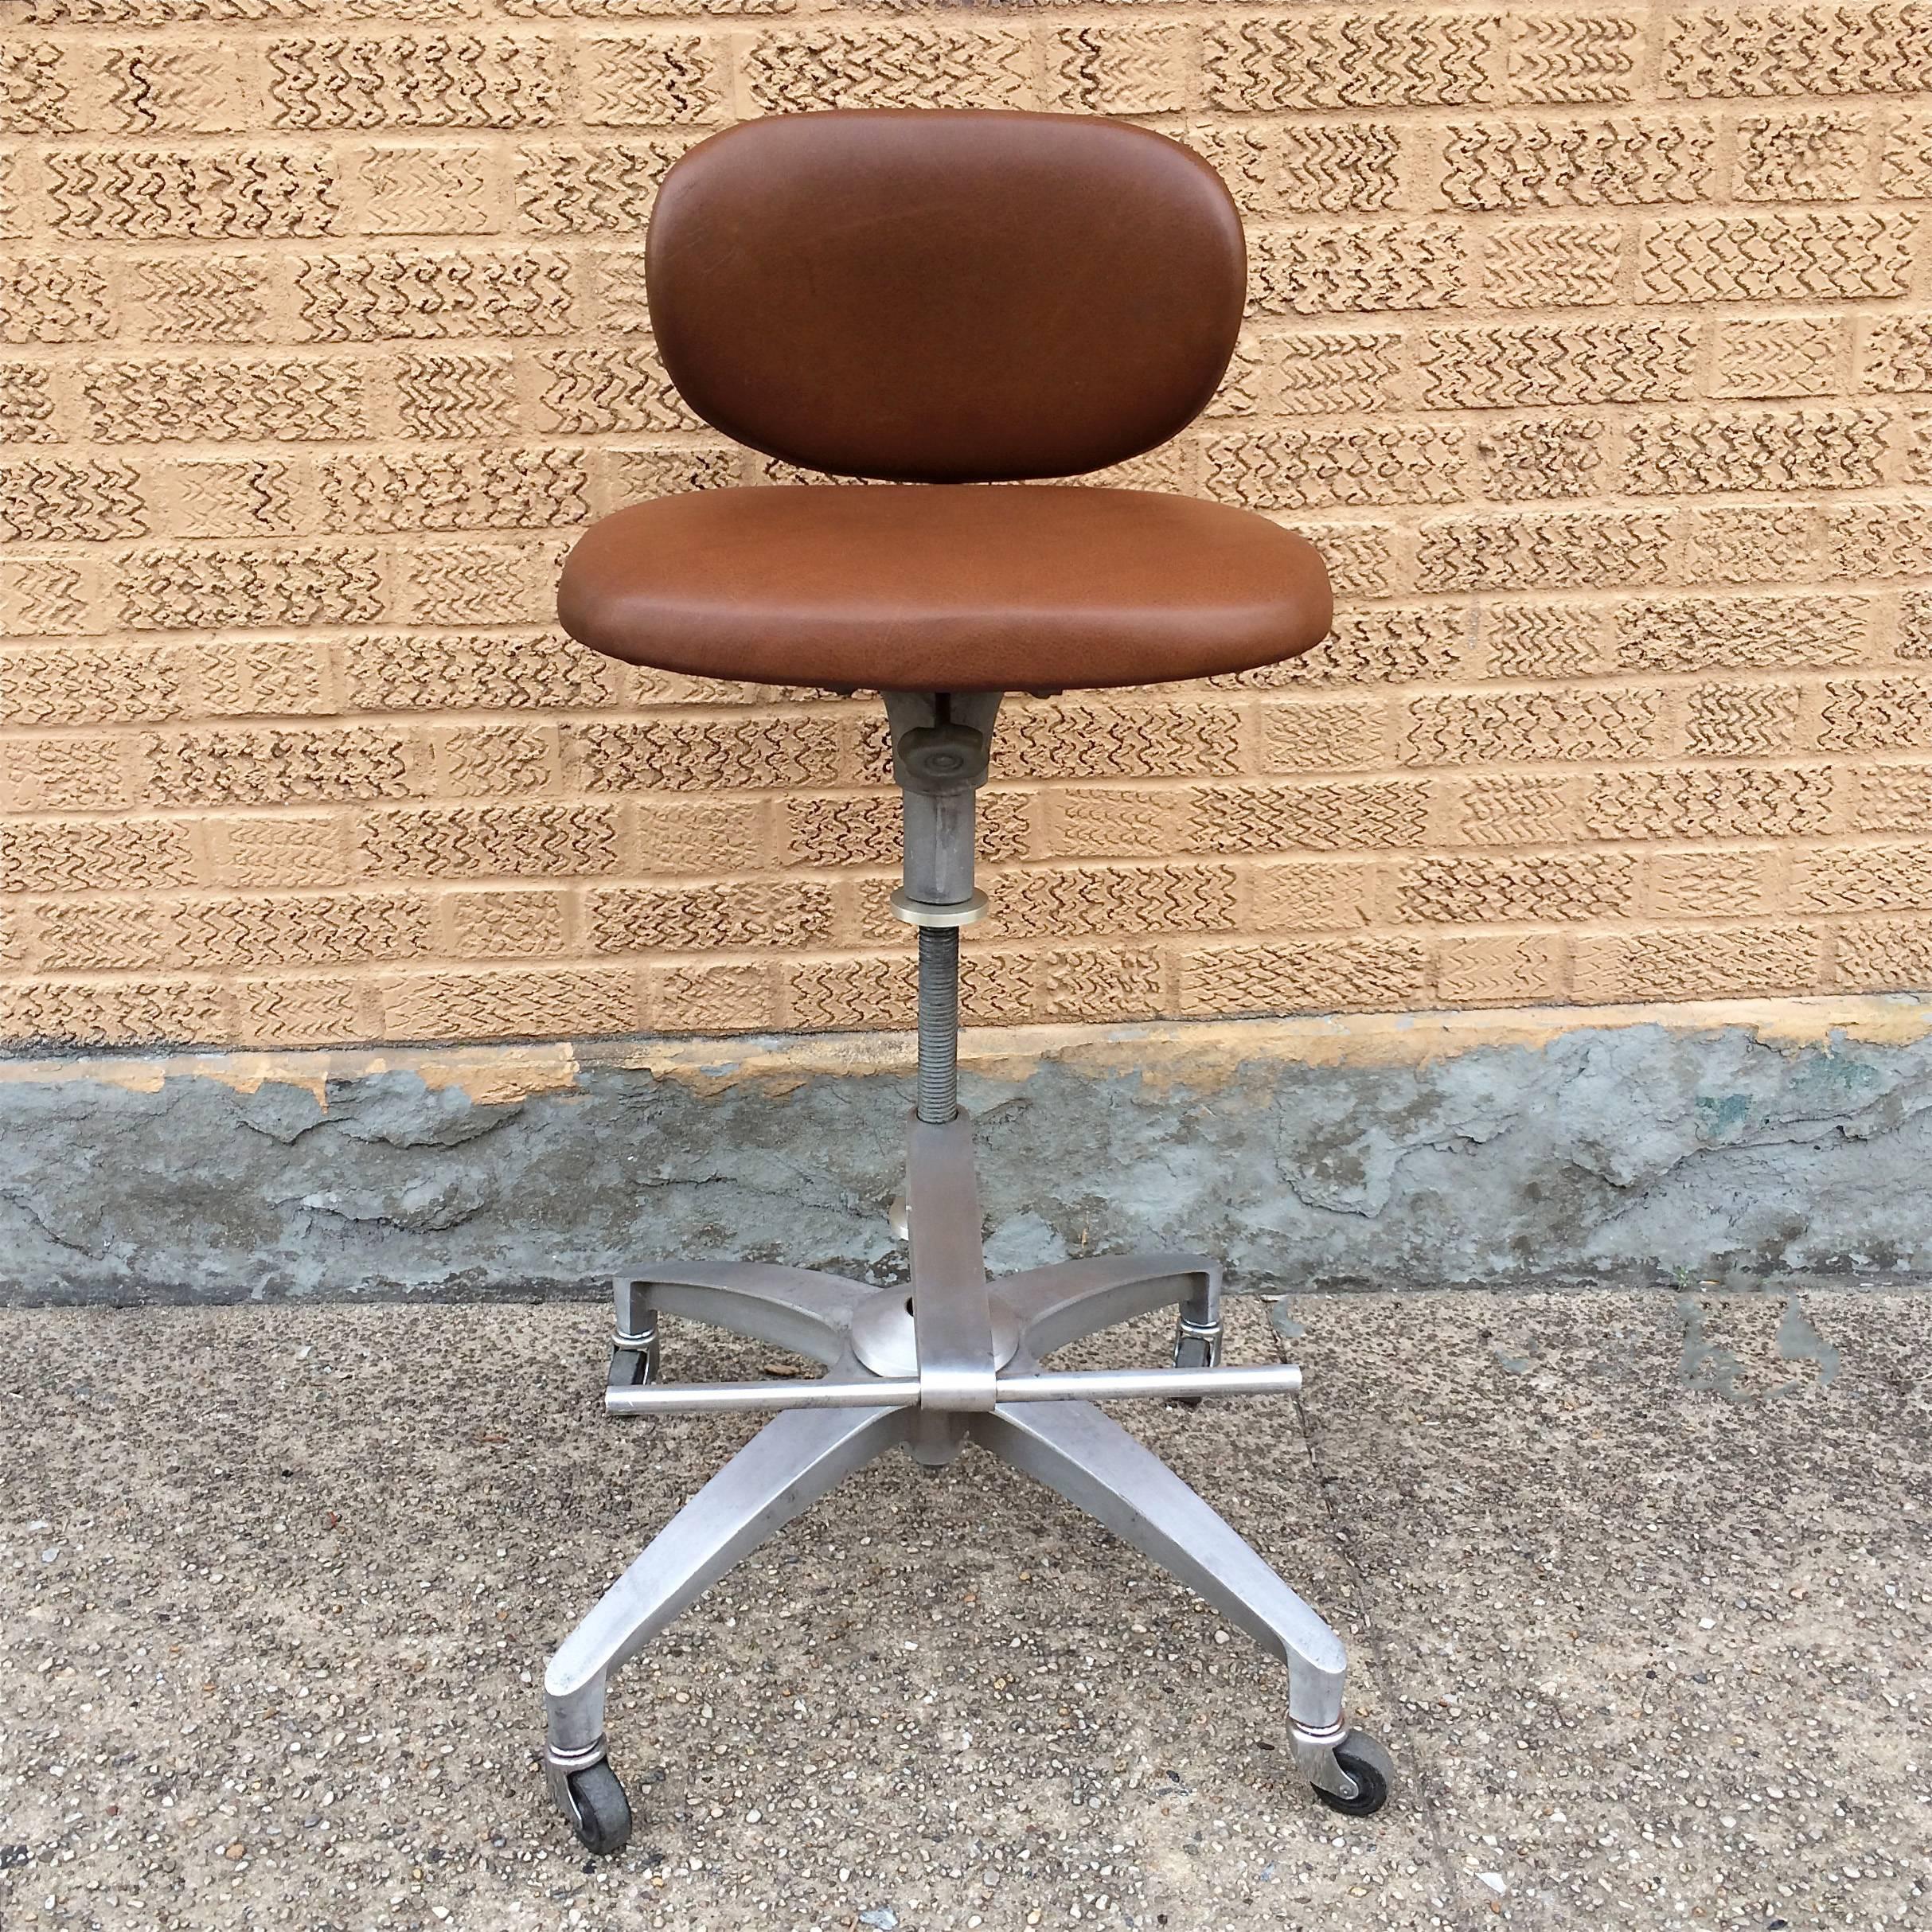 Mid-Century Modern, brushed aluminum, adjustable height, rolling, swivel, drafting stool with footrest by Shaw Walker with newly upholstered tan leather seat and back.